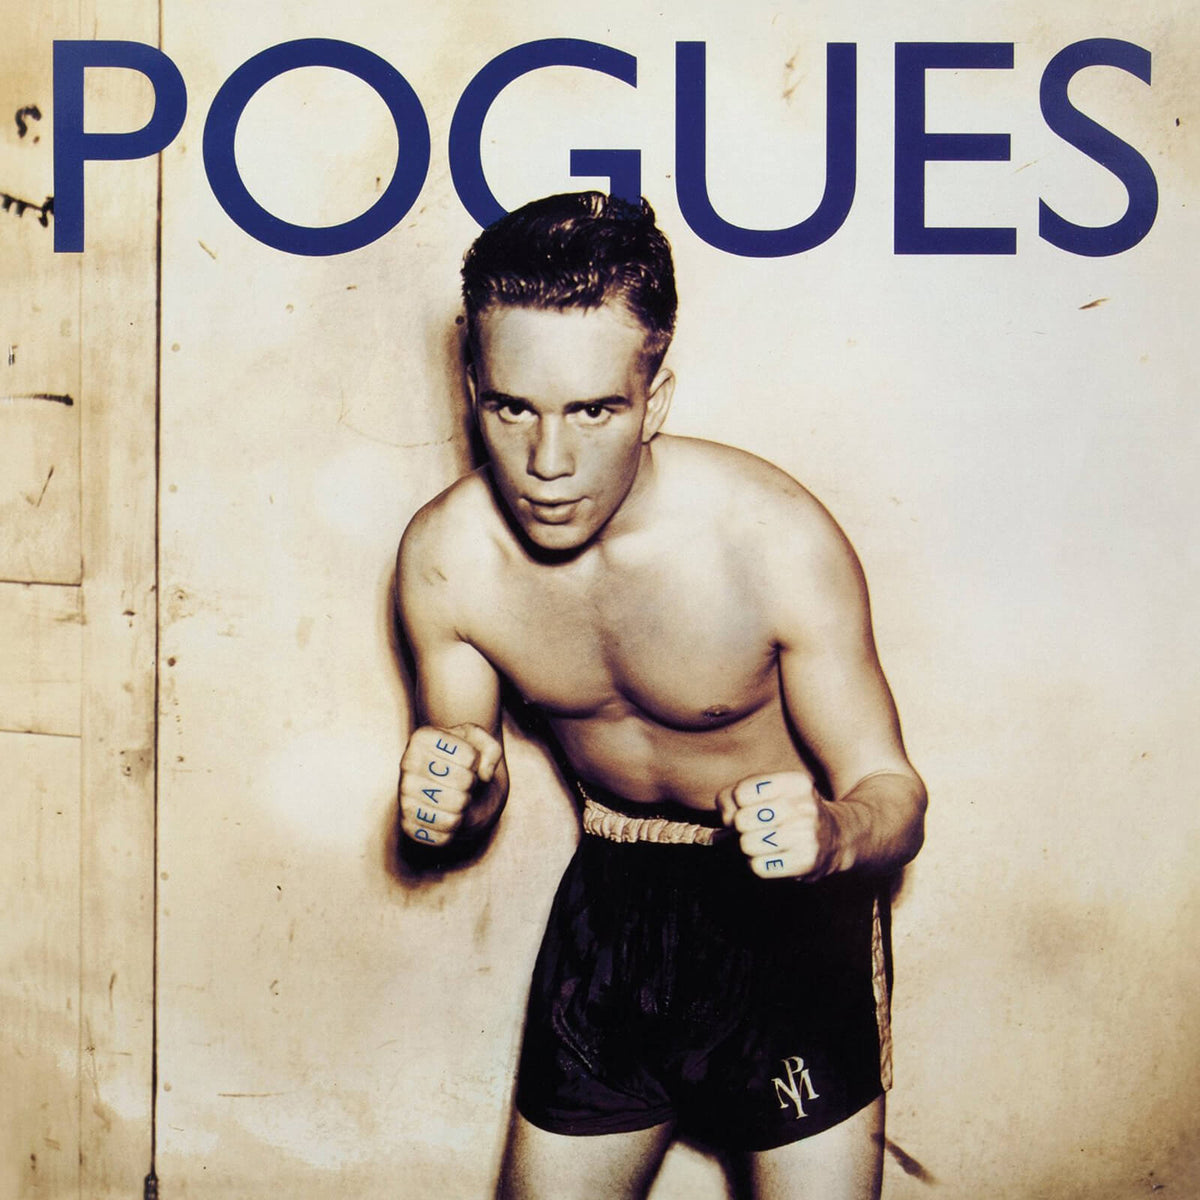 The Pogues : Peace and Love